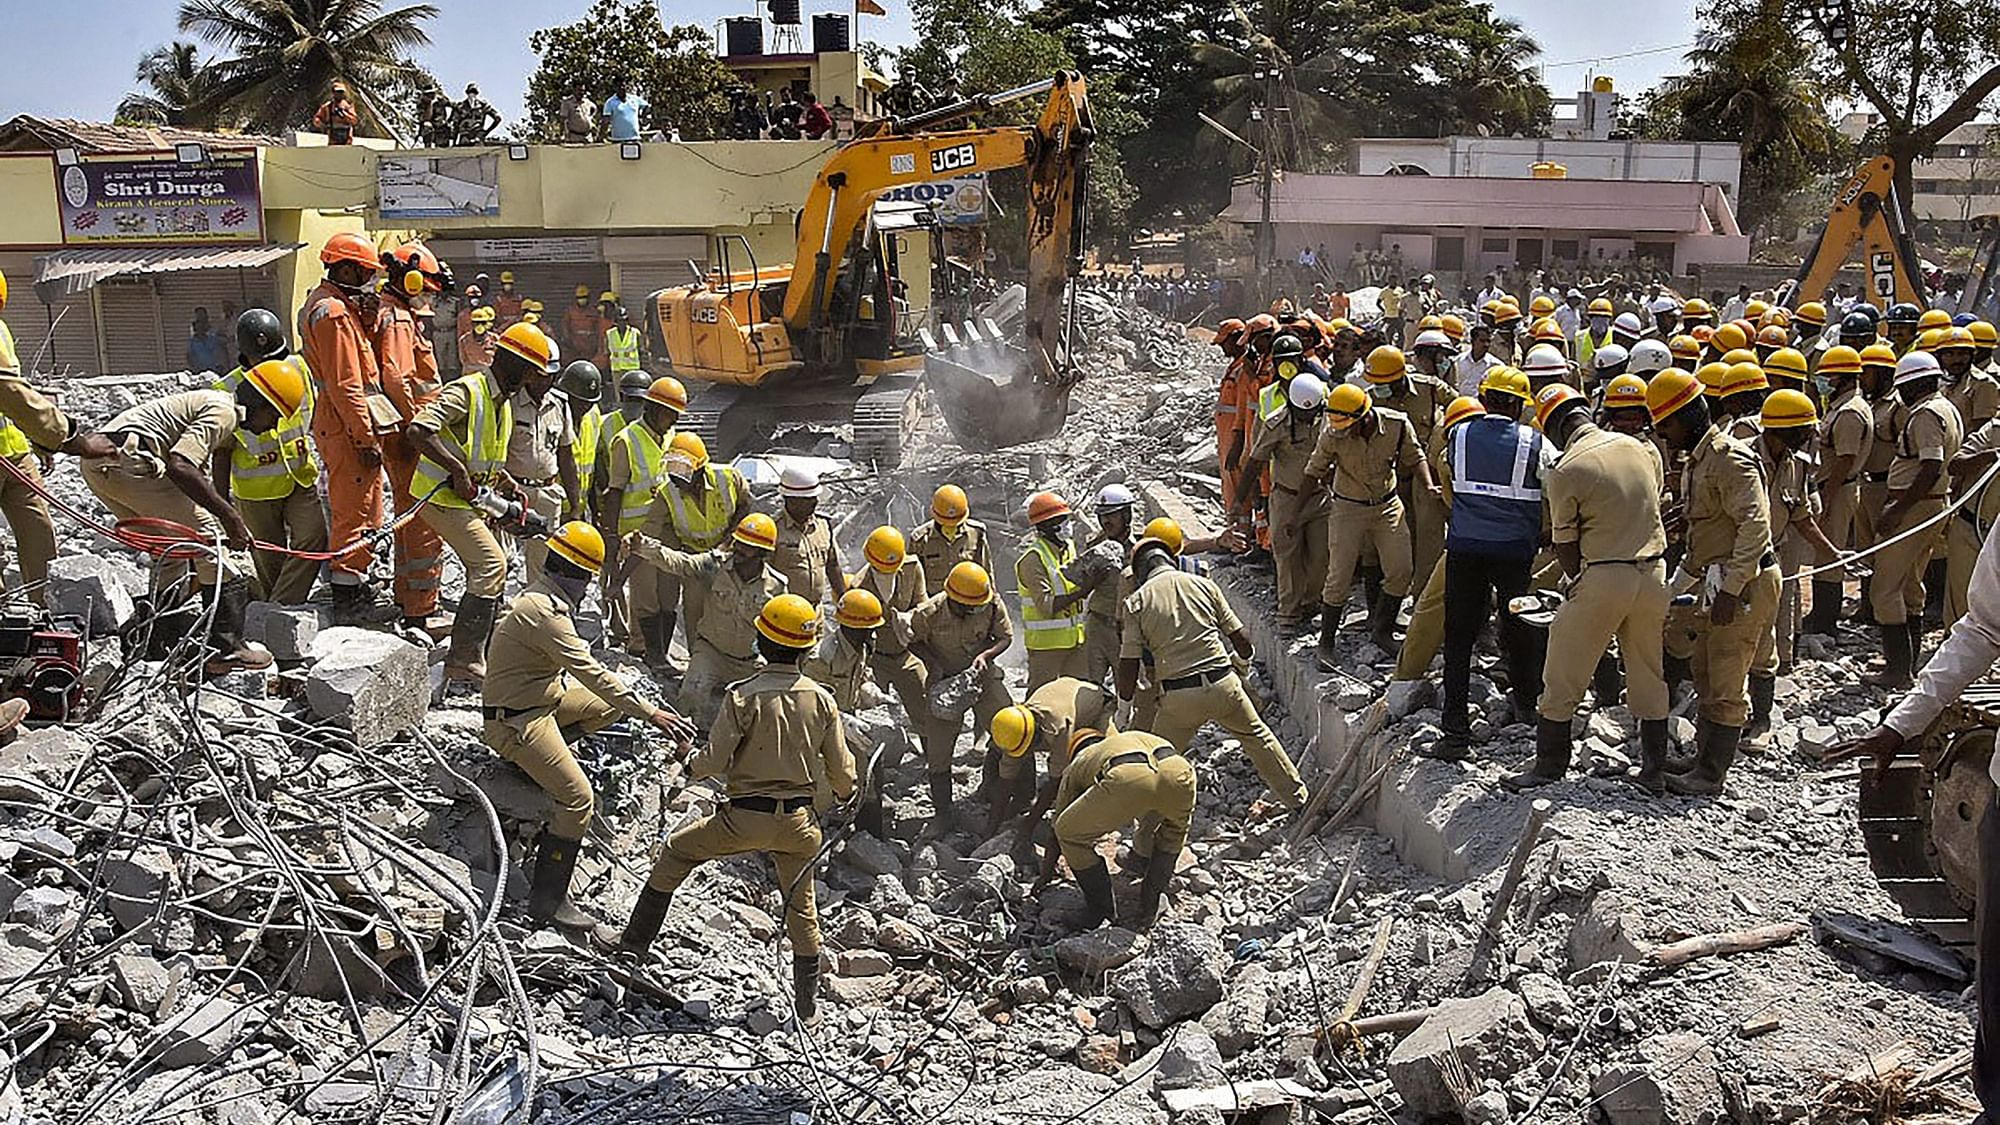 Rescue teams conduct operations after an under-construction building collapsed, at Dharwad in north Karnataka, Thursday, 21 March 2019.